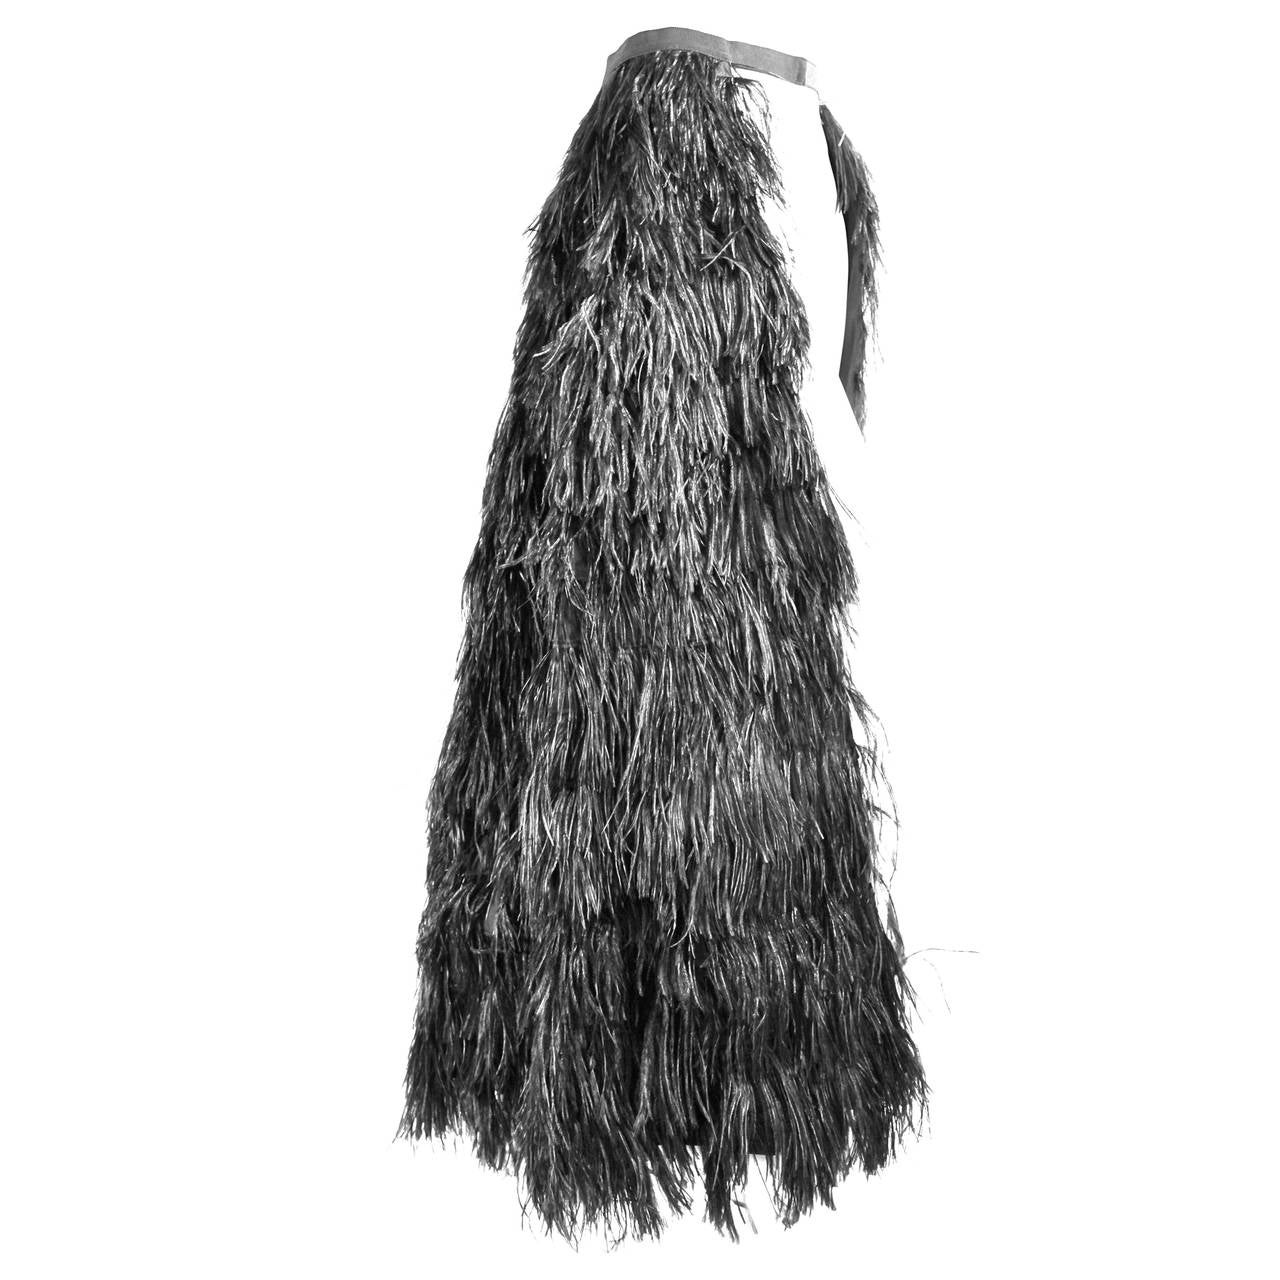 Givenchy Ostrich Feather Overskirt or Cape